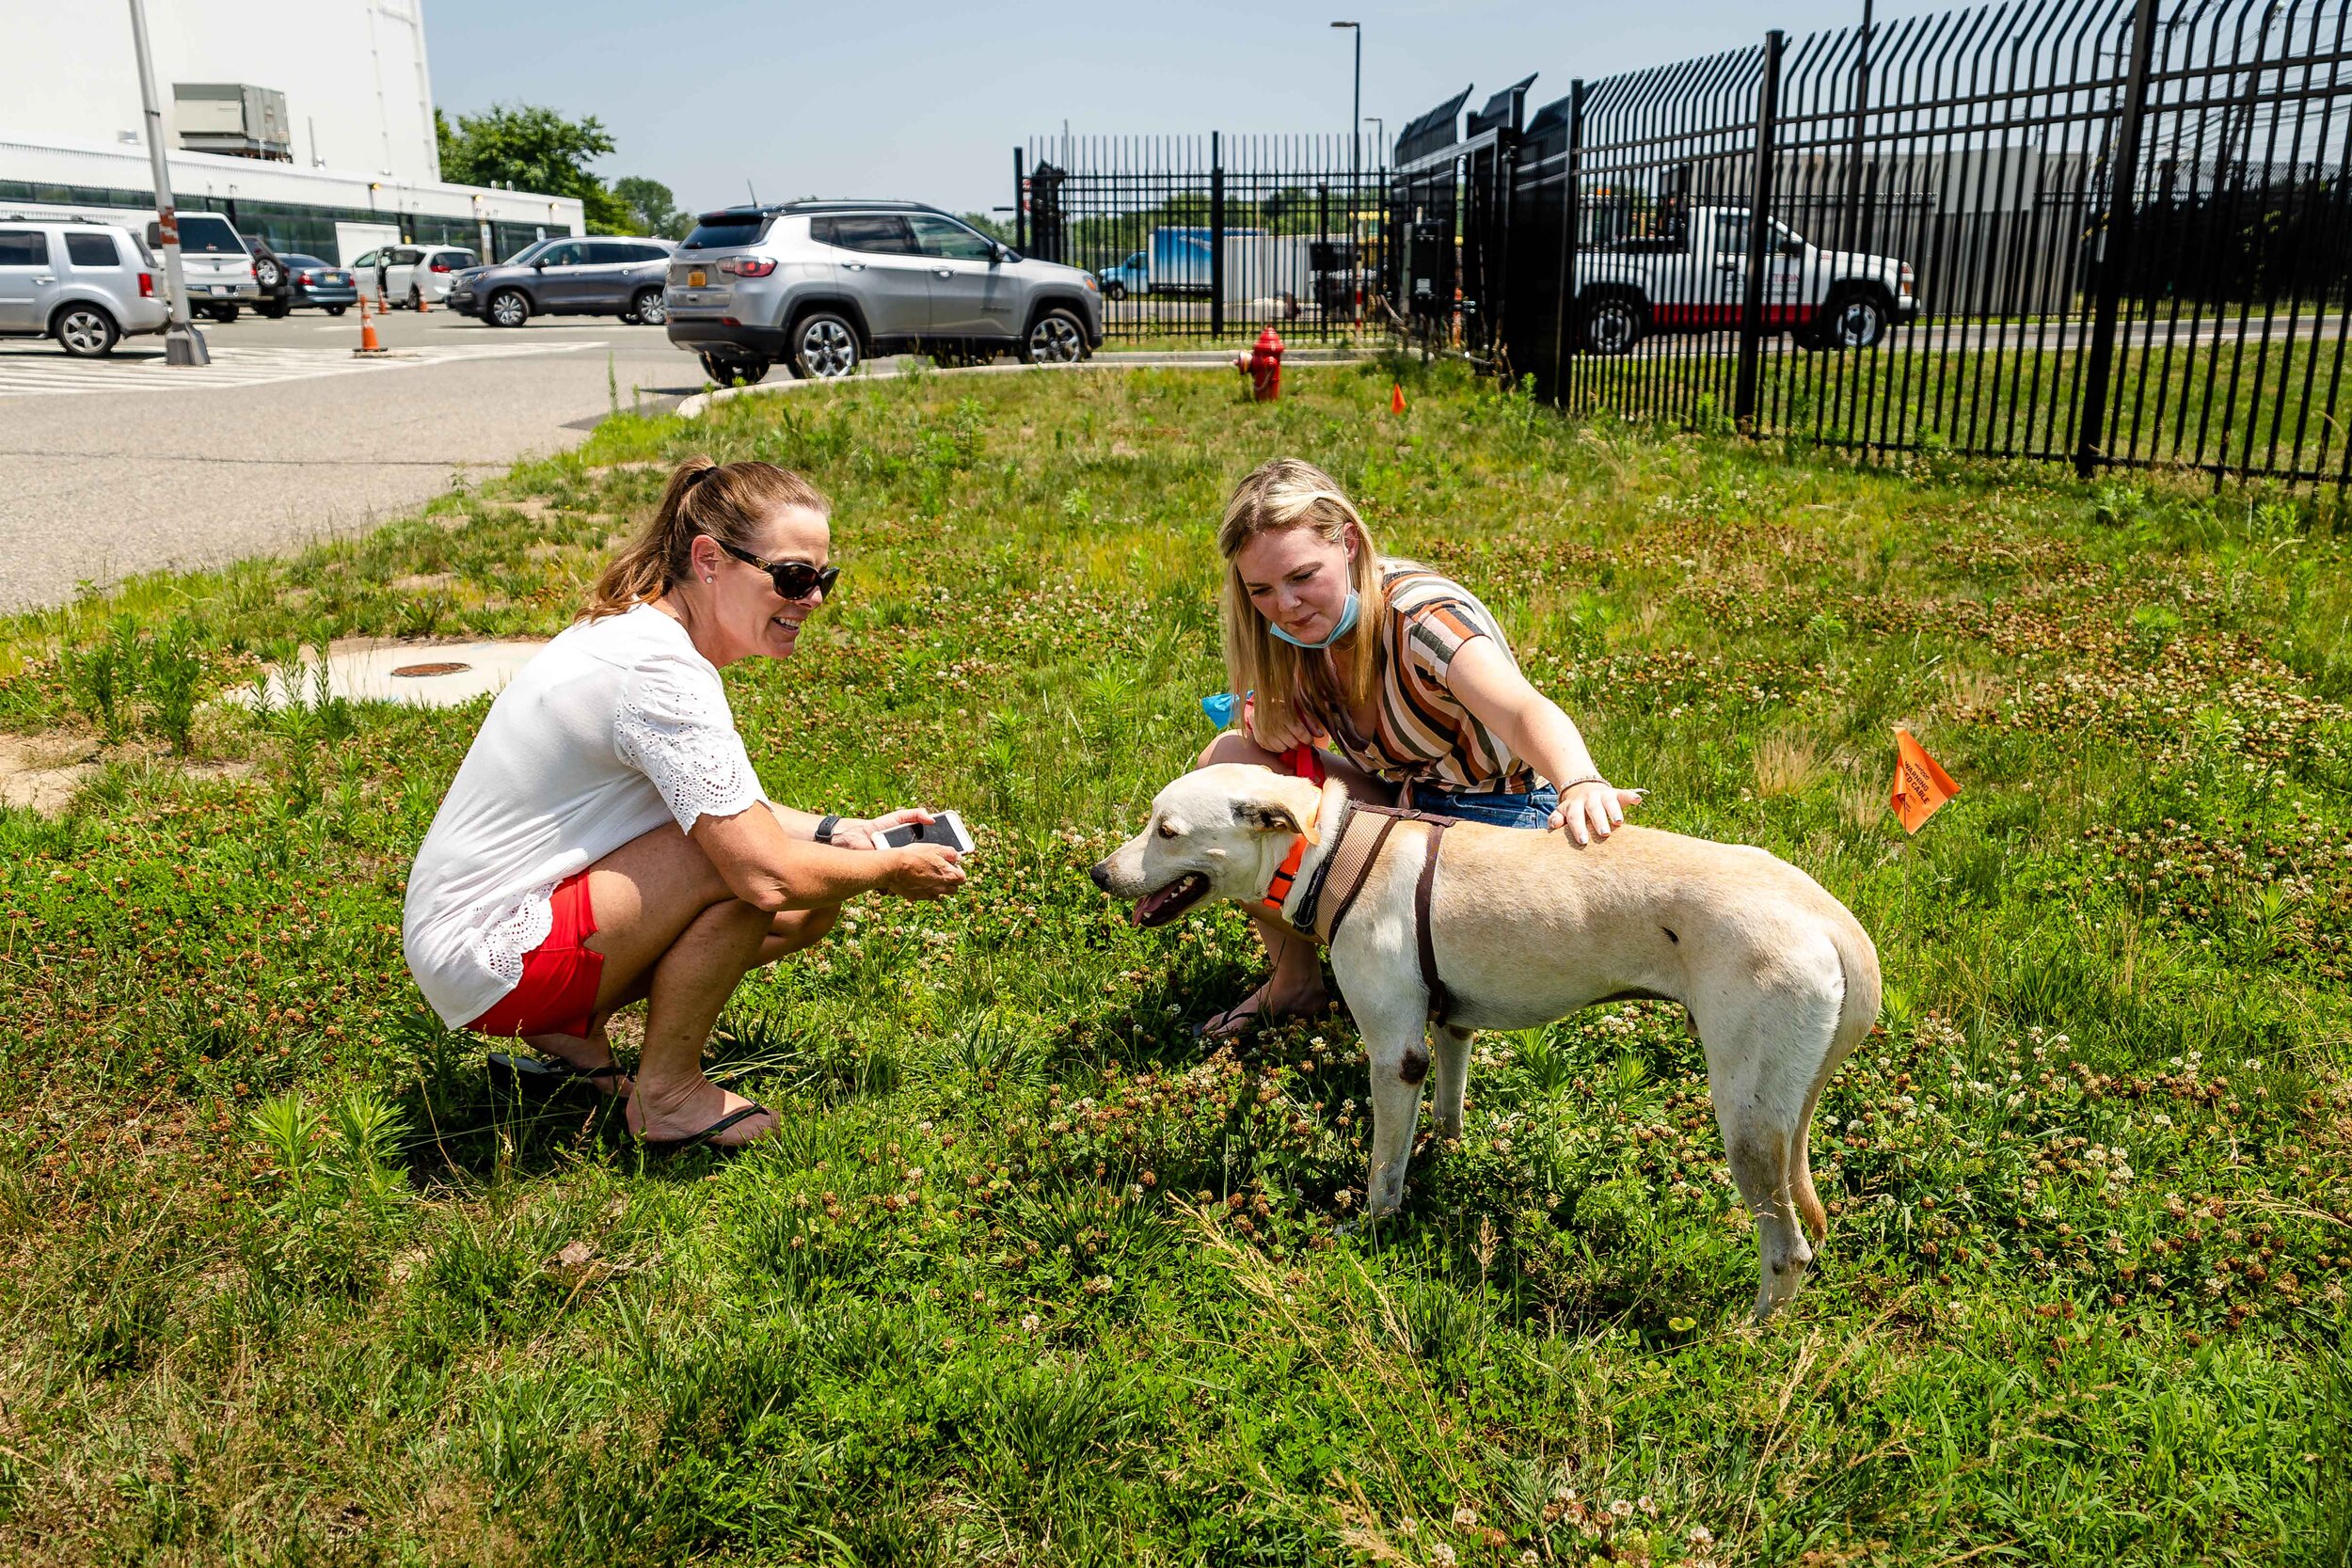 0750_SatoProject-MissionPossible11_2020-07-05_©NYCPetPhotographer.jpg